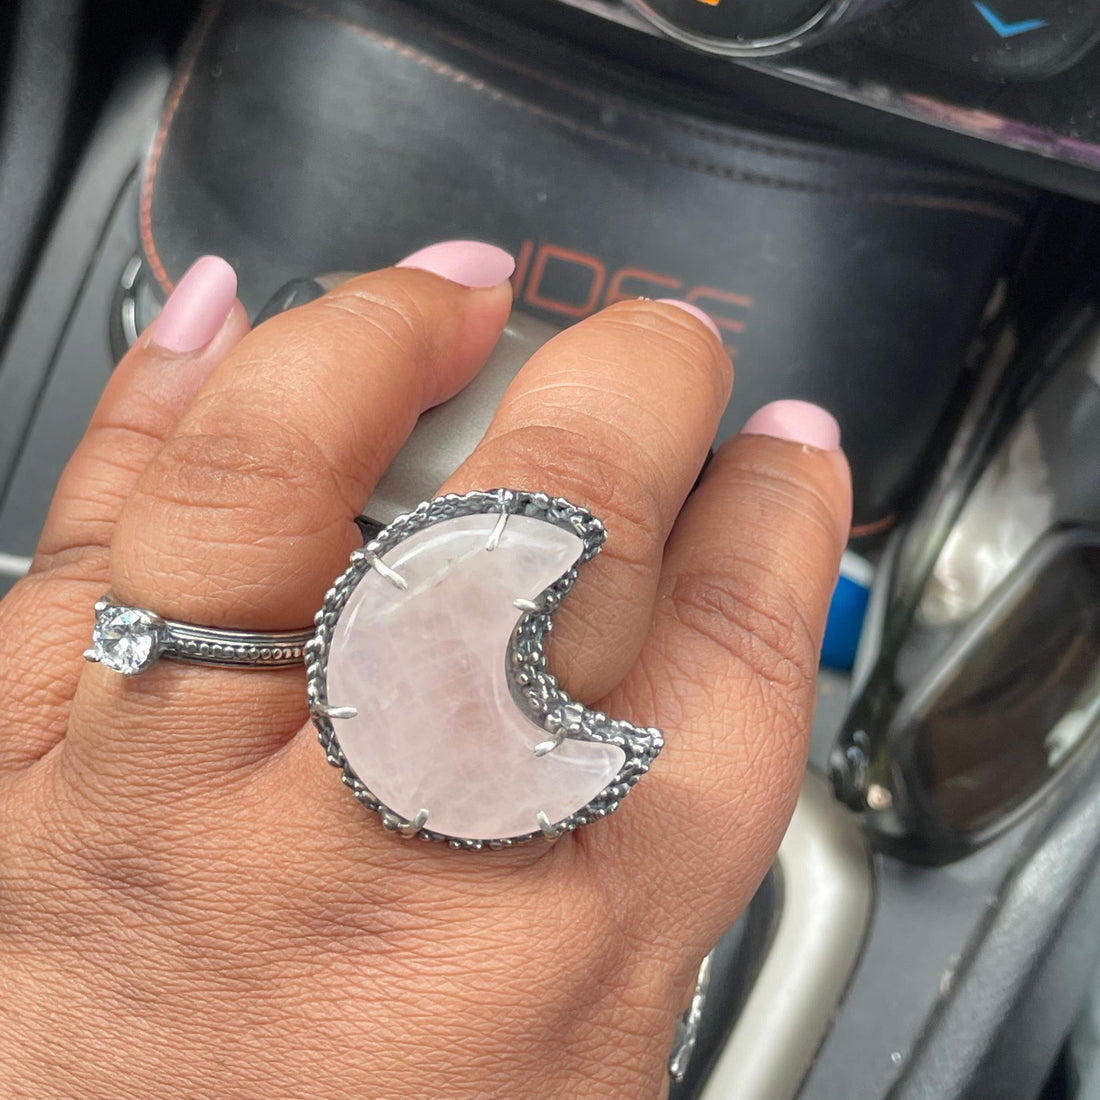 Rose Quartz Moon shaped Sterling Silver Ring US Size 8 - Sand and Snow Jewelry - Rings - One of a Kind